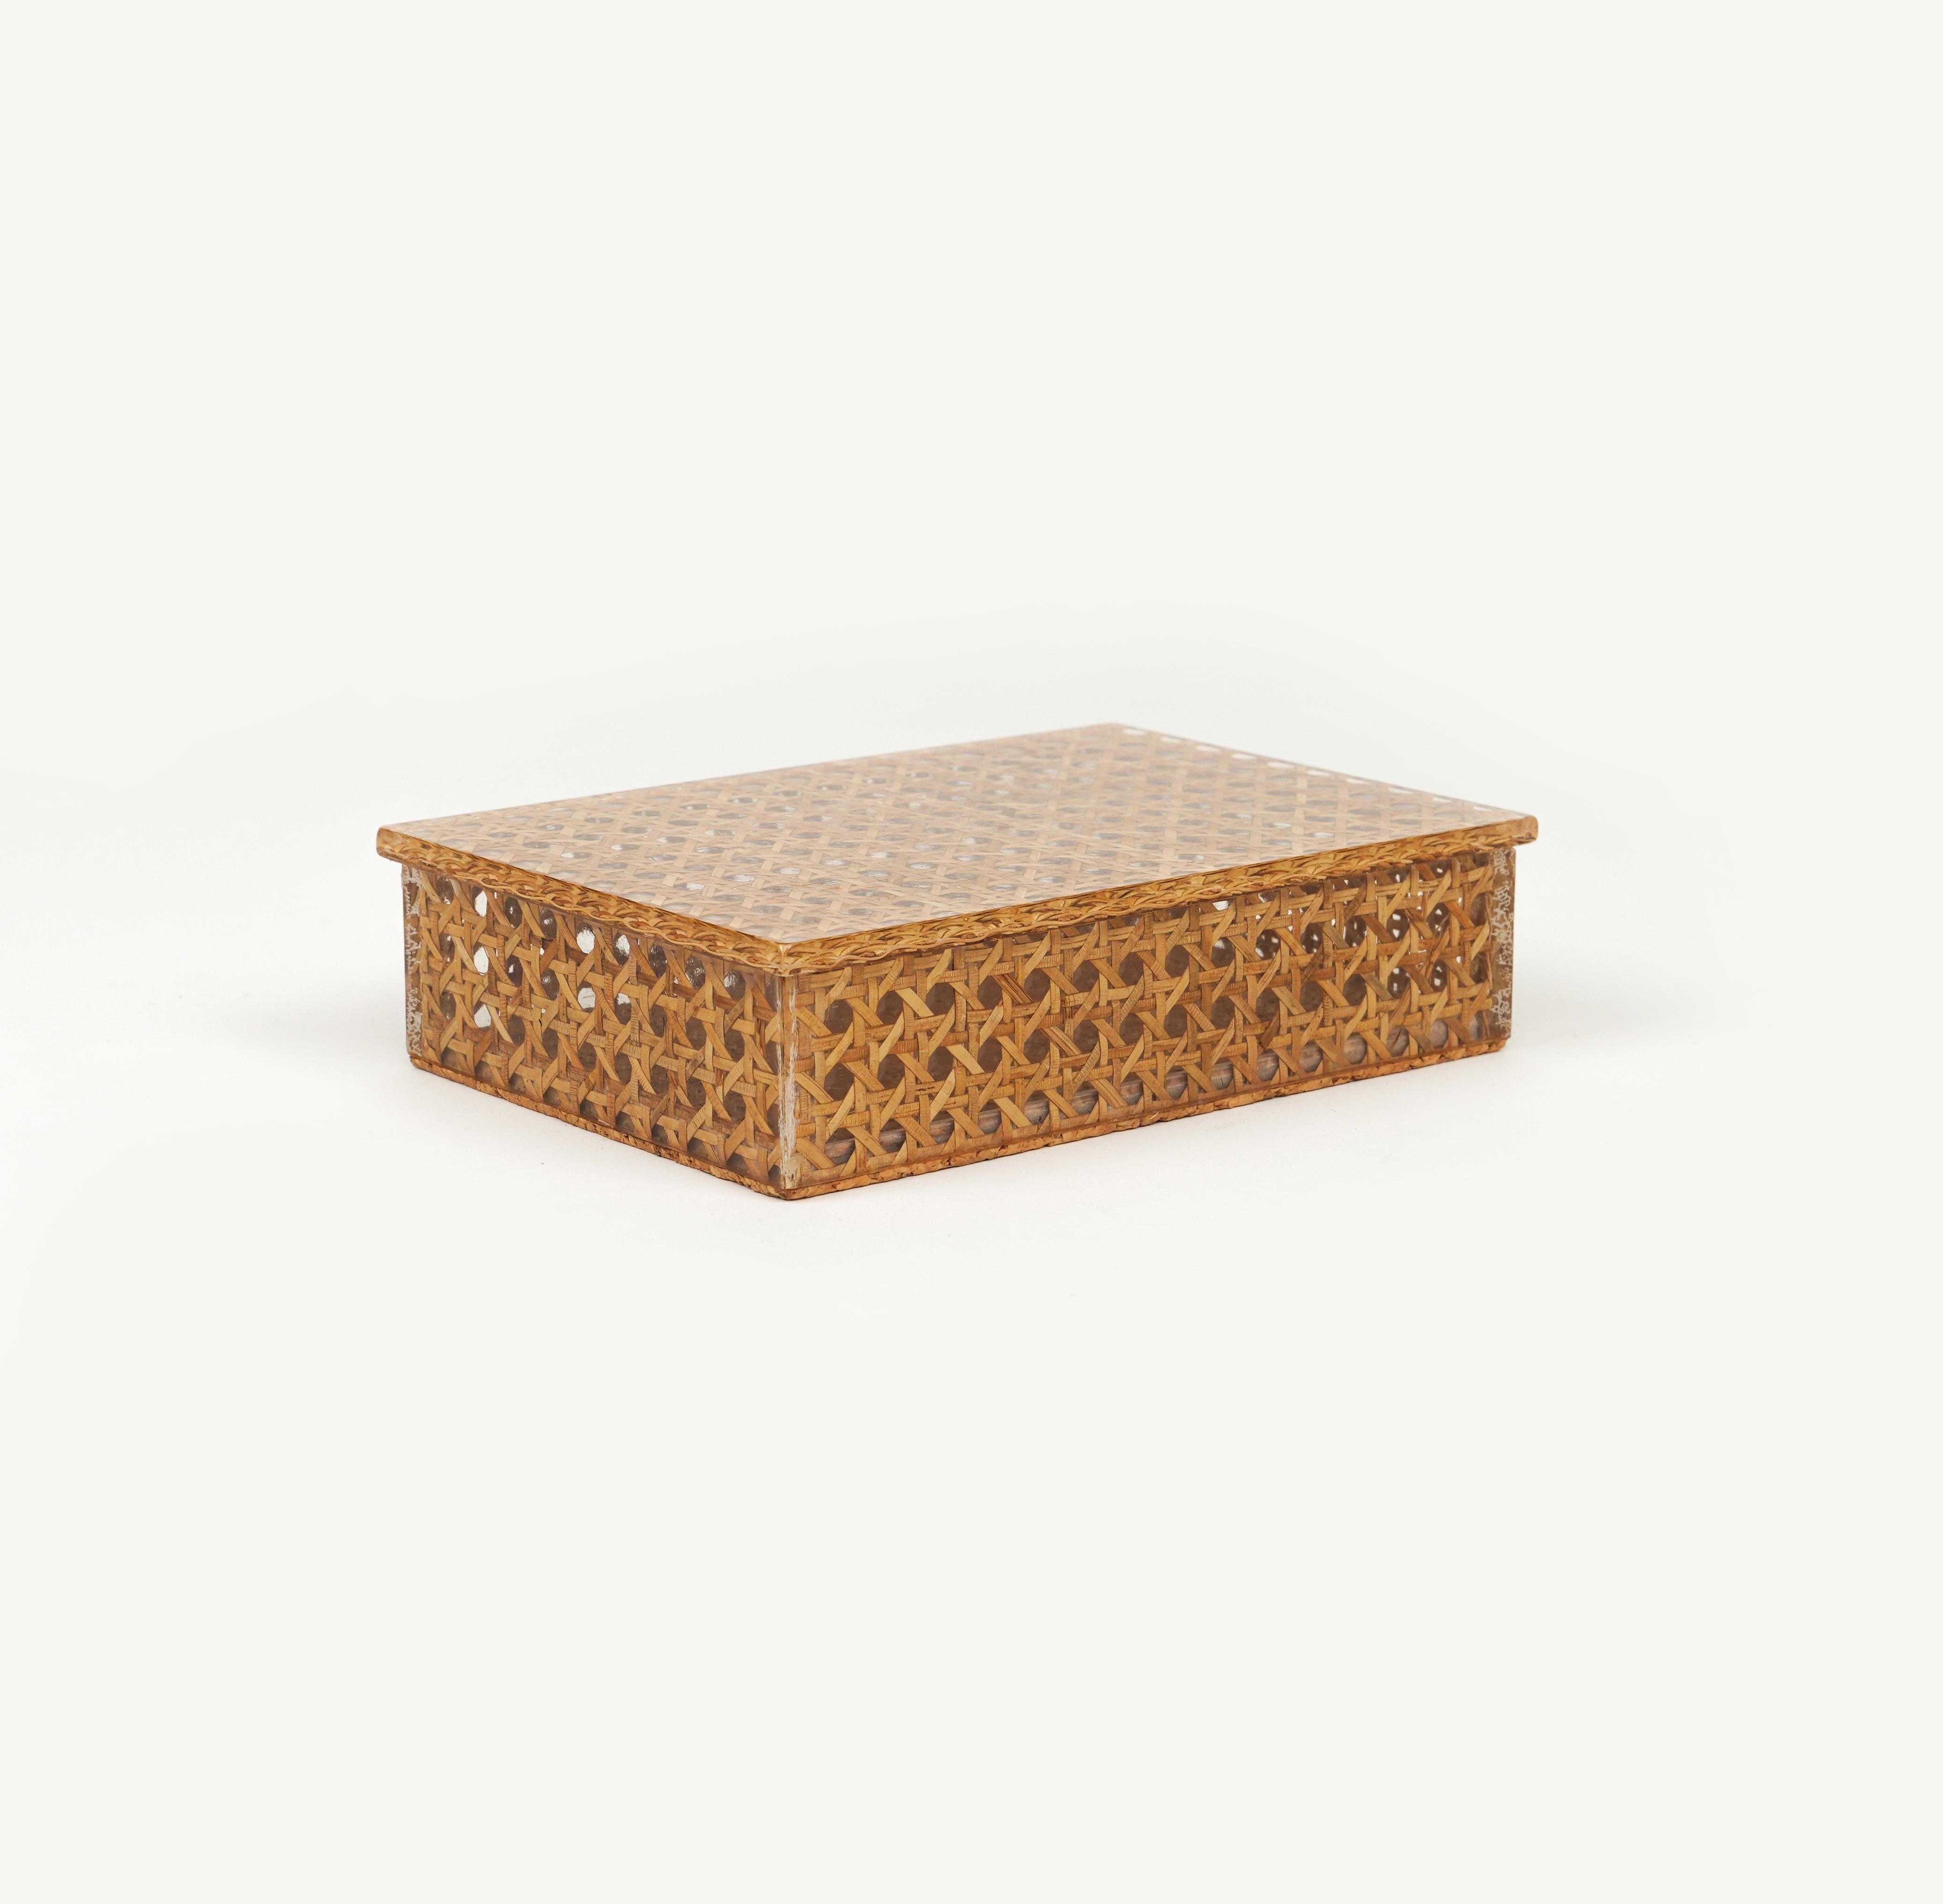 Italian Midcentury Box in Rattan, Lucite and Cork Christian Dior Style, Italy 1970s For Sale